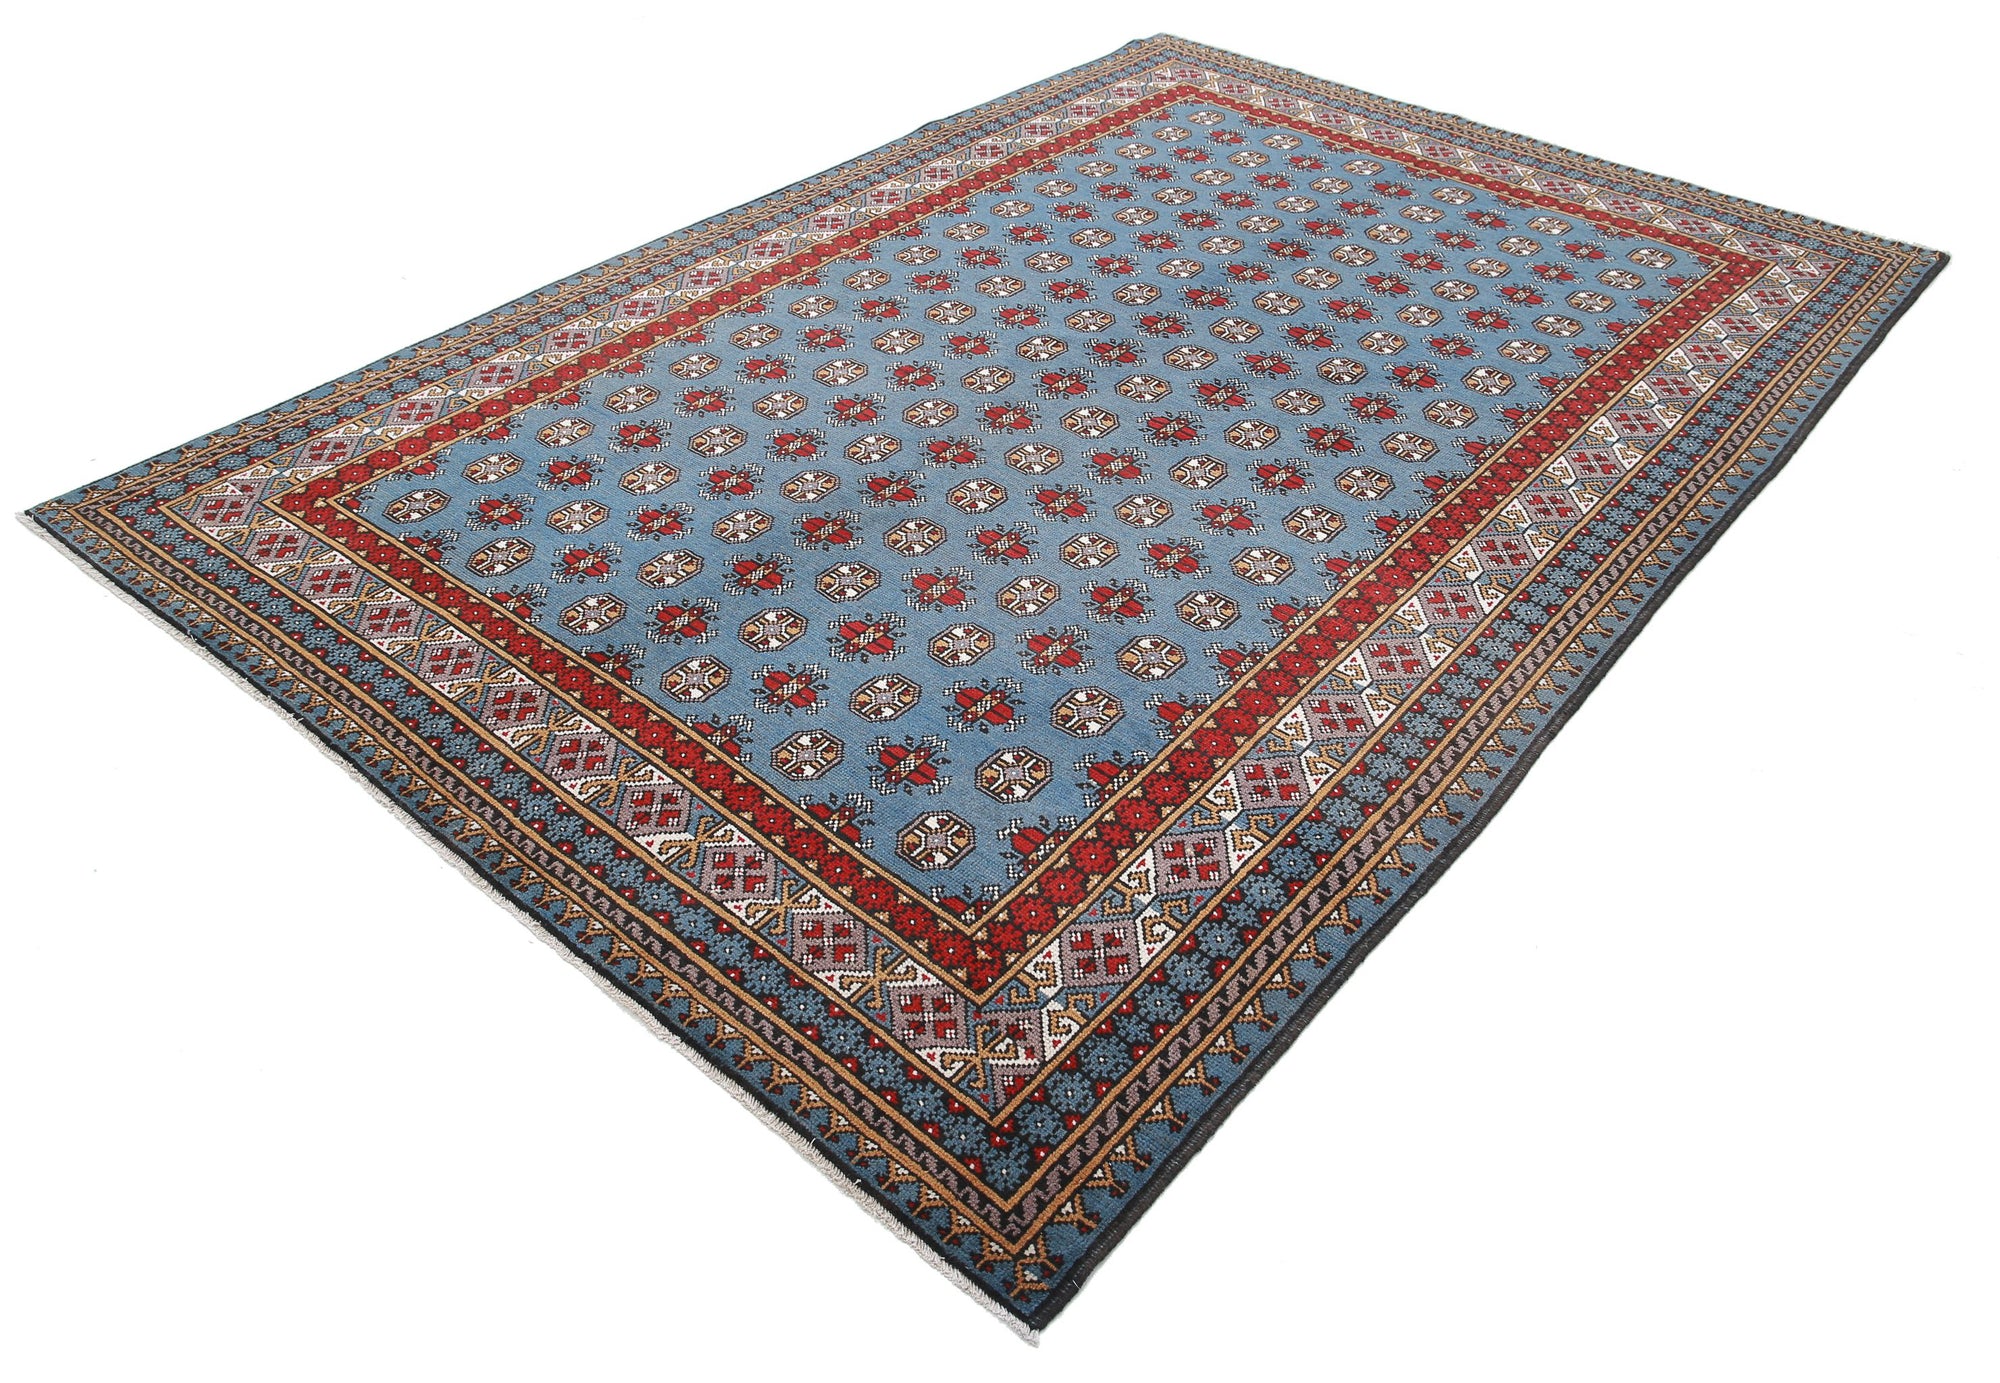 Revival-hand-knotted-gul-collection-wool-rug-5013976-2.jpg